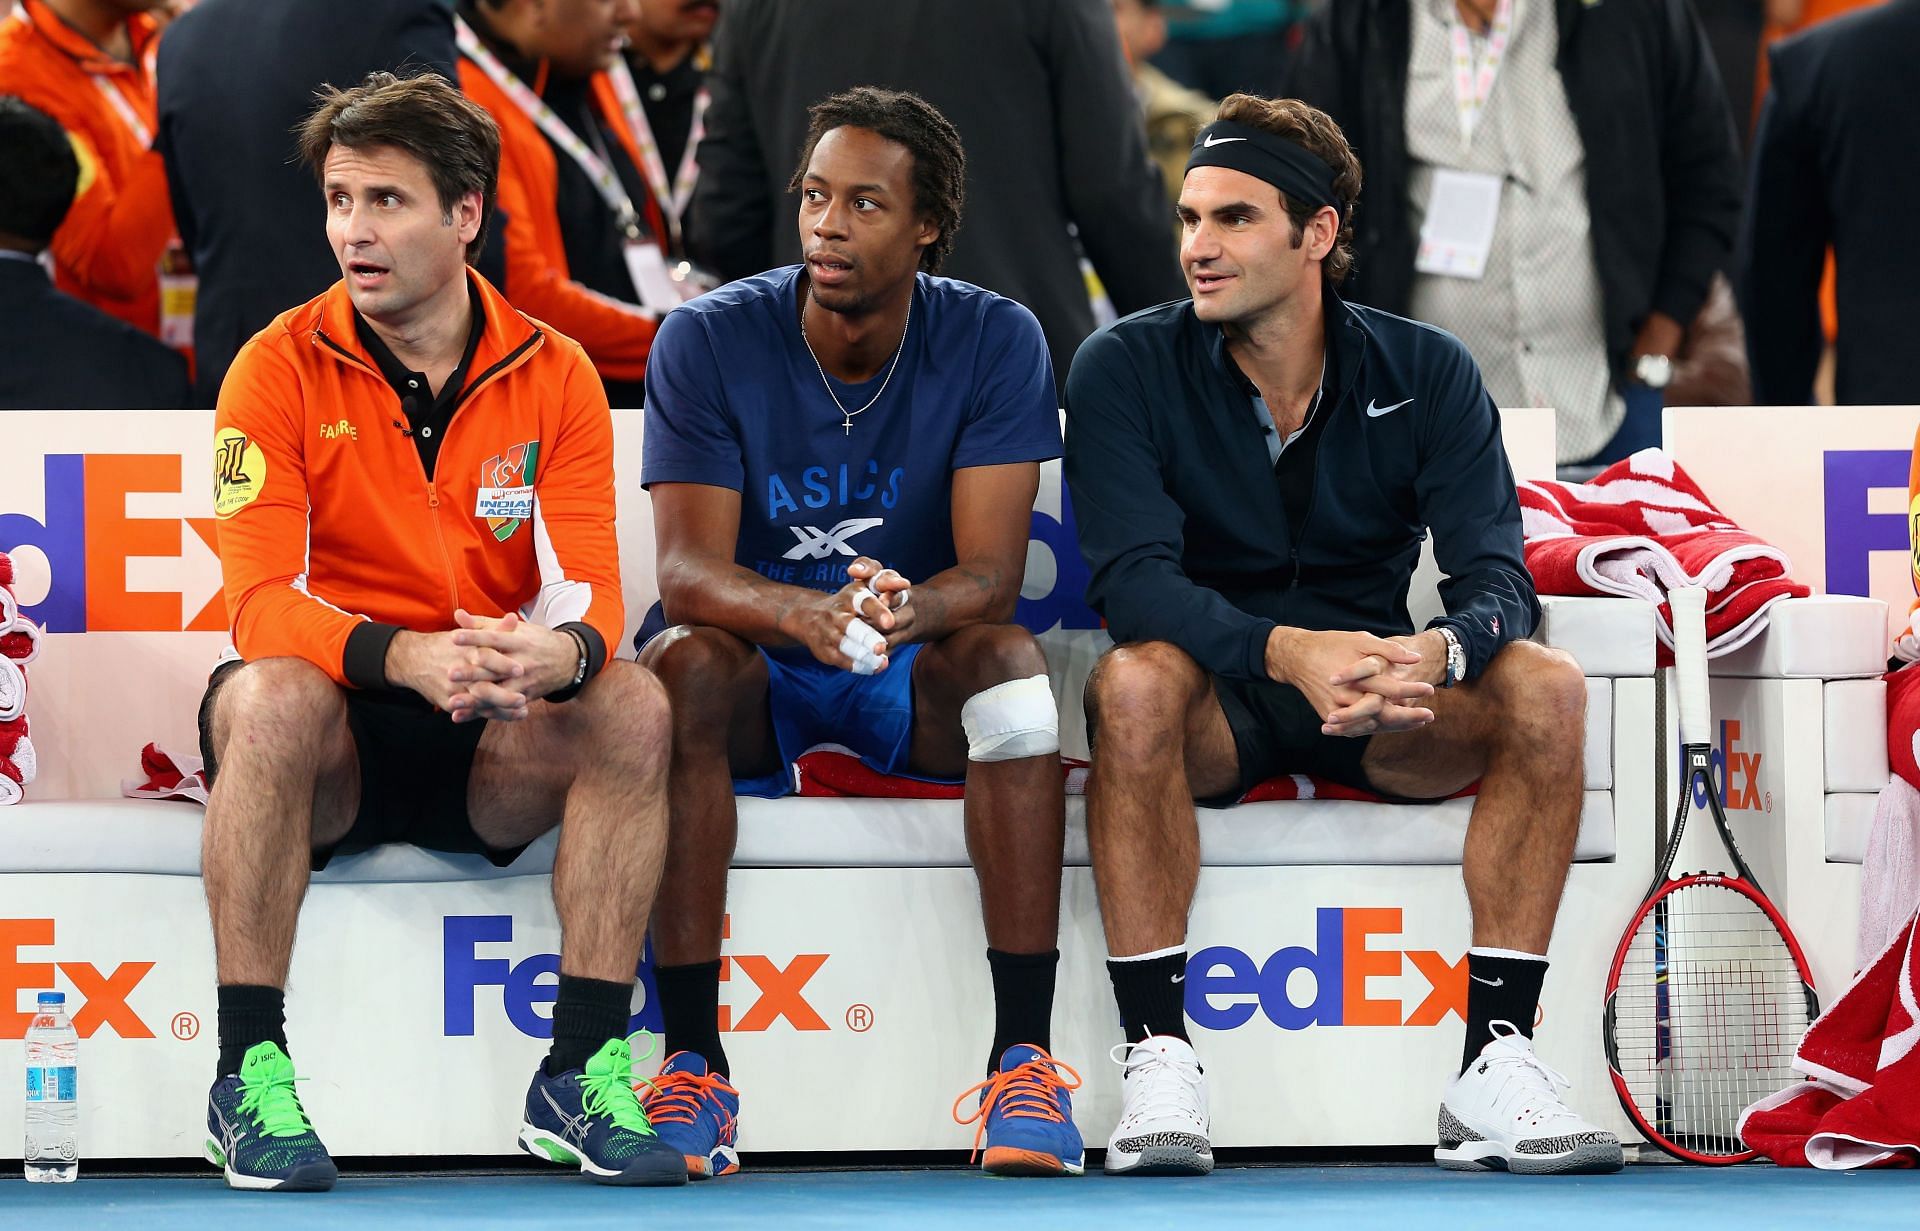 Santoro (left) with Monfils and Federer(right) at the International Premier Tennis League in India